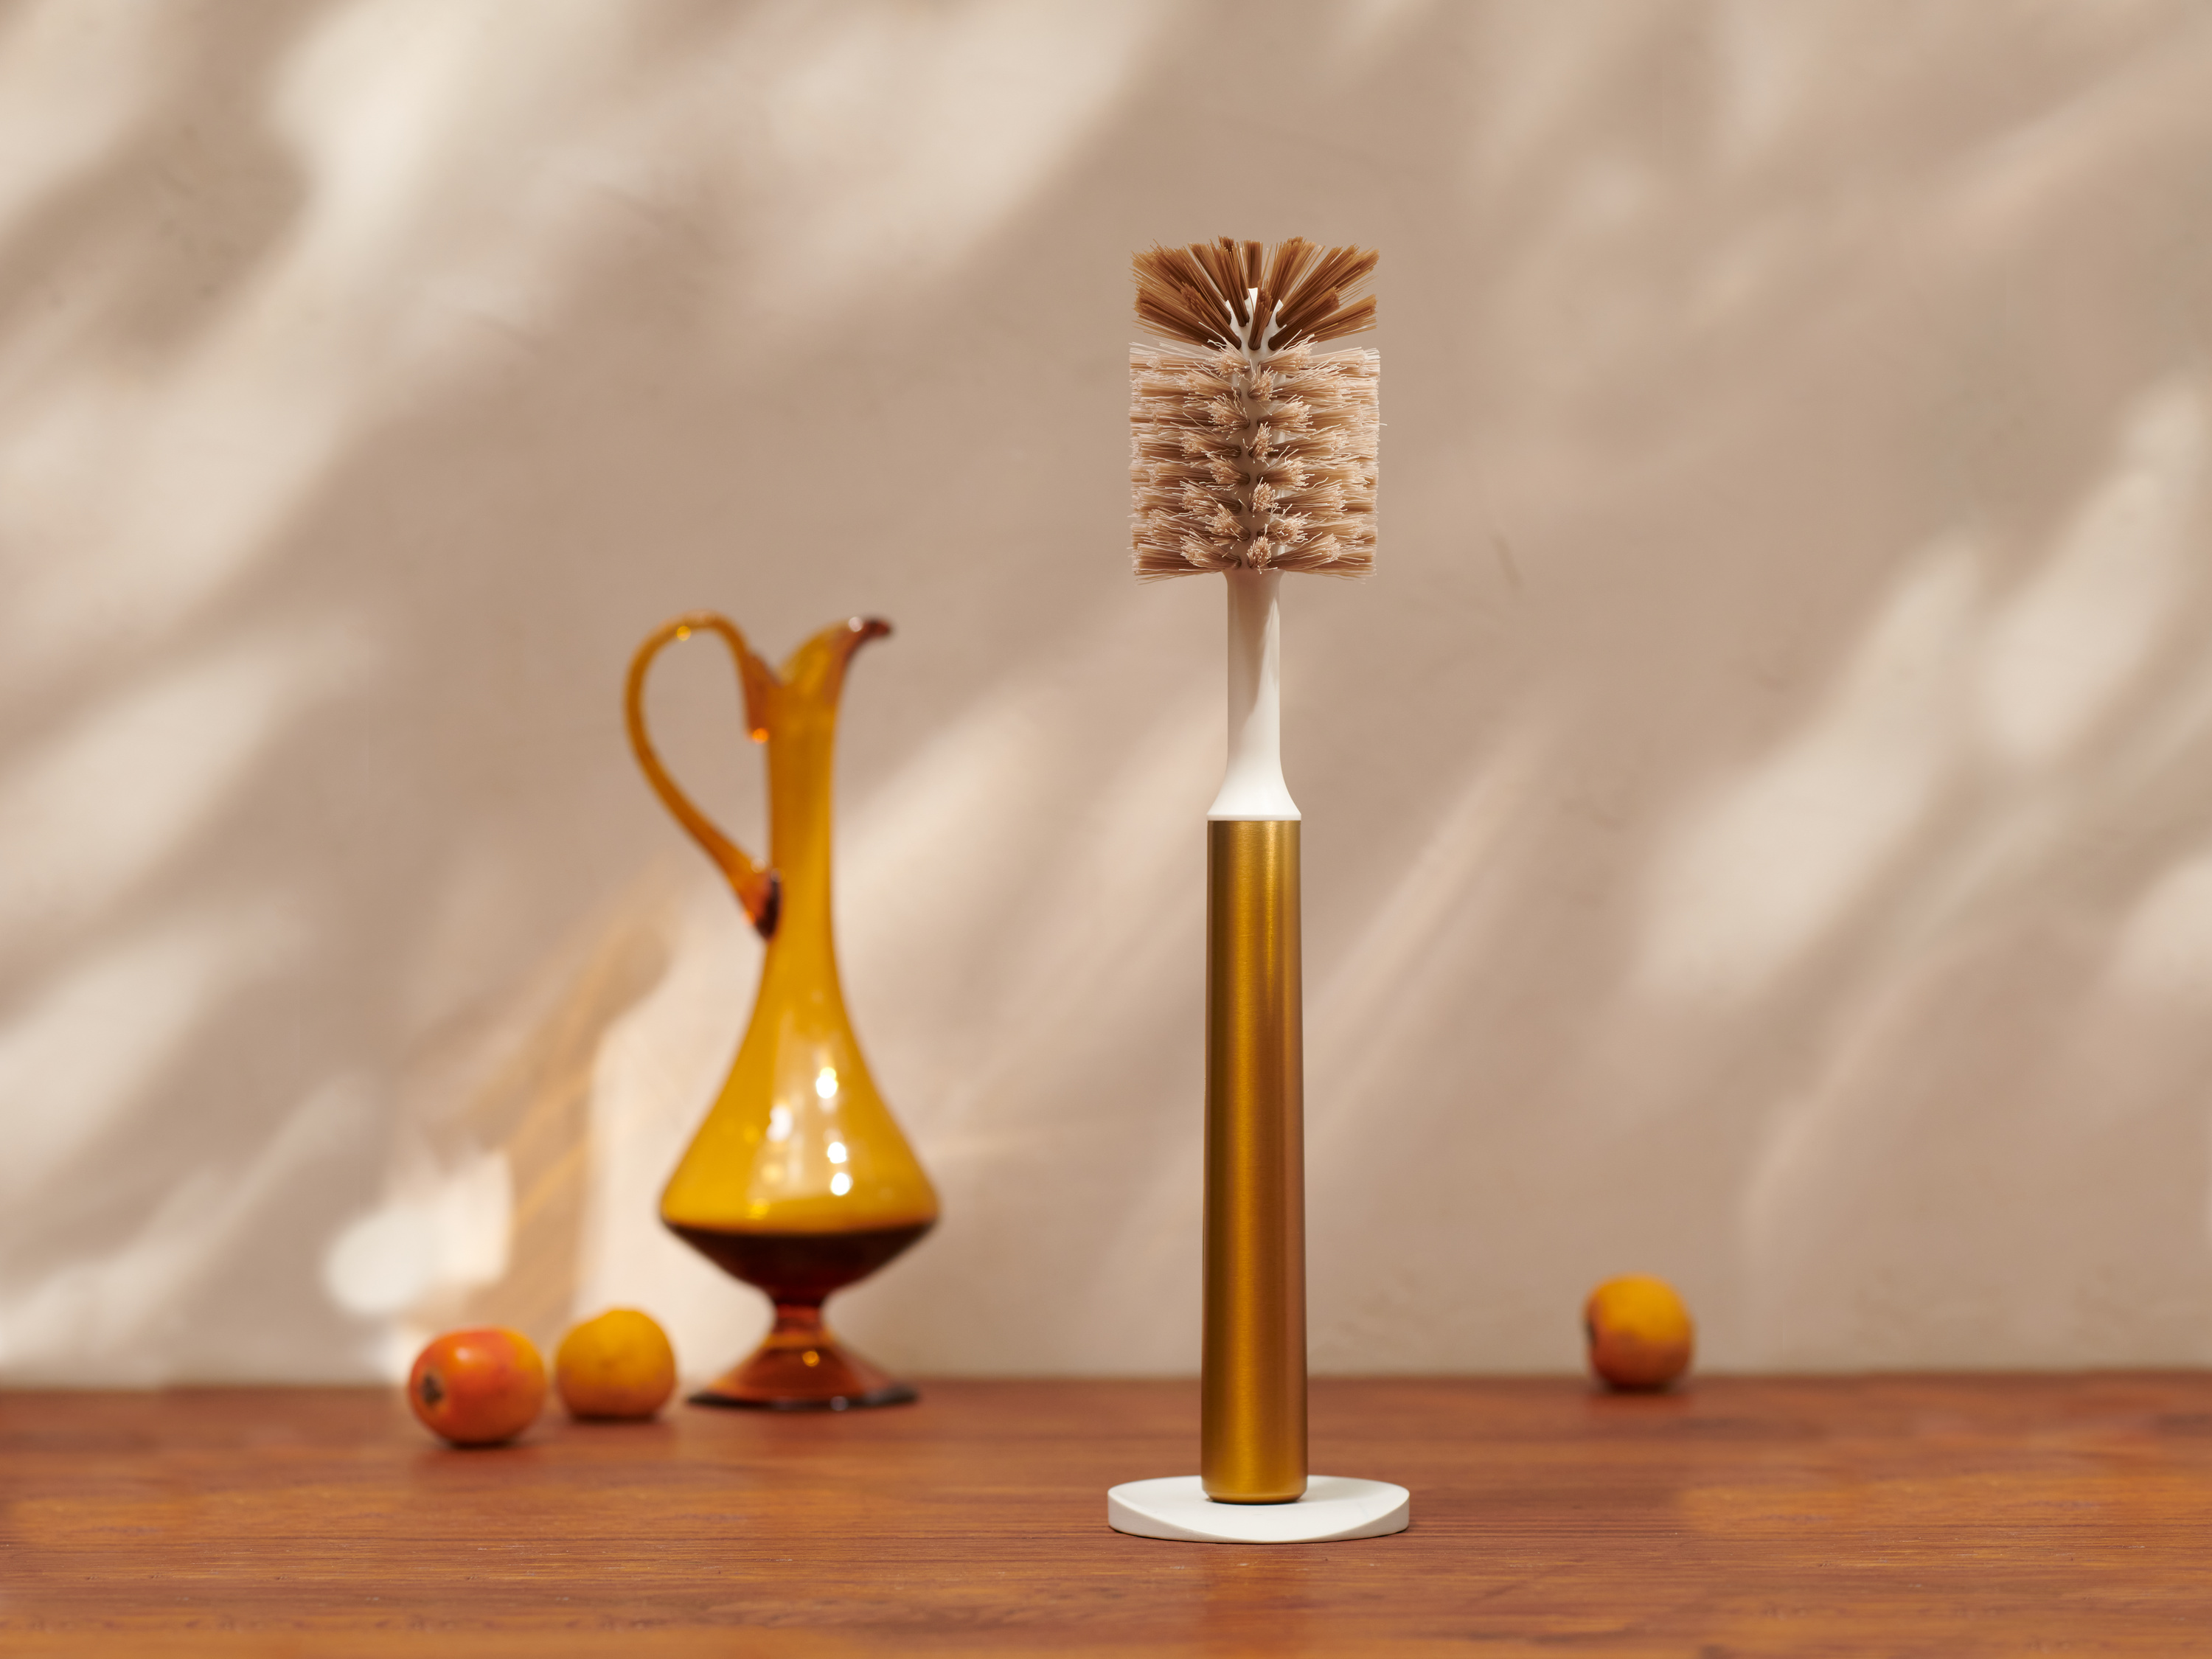 Curio Homegoods Brass Ionic Bottle Brush with vase and fruits in the background